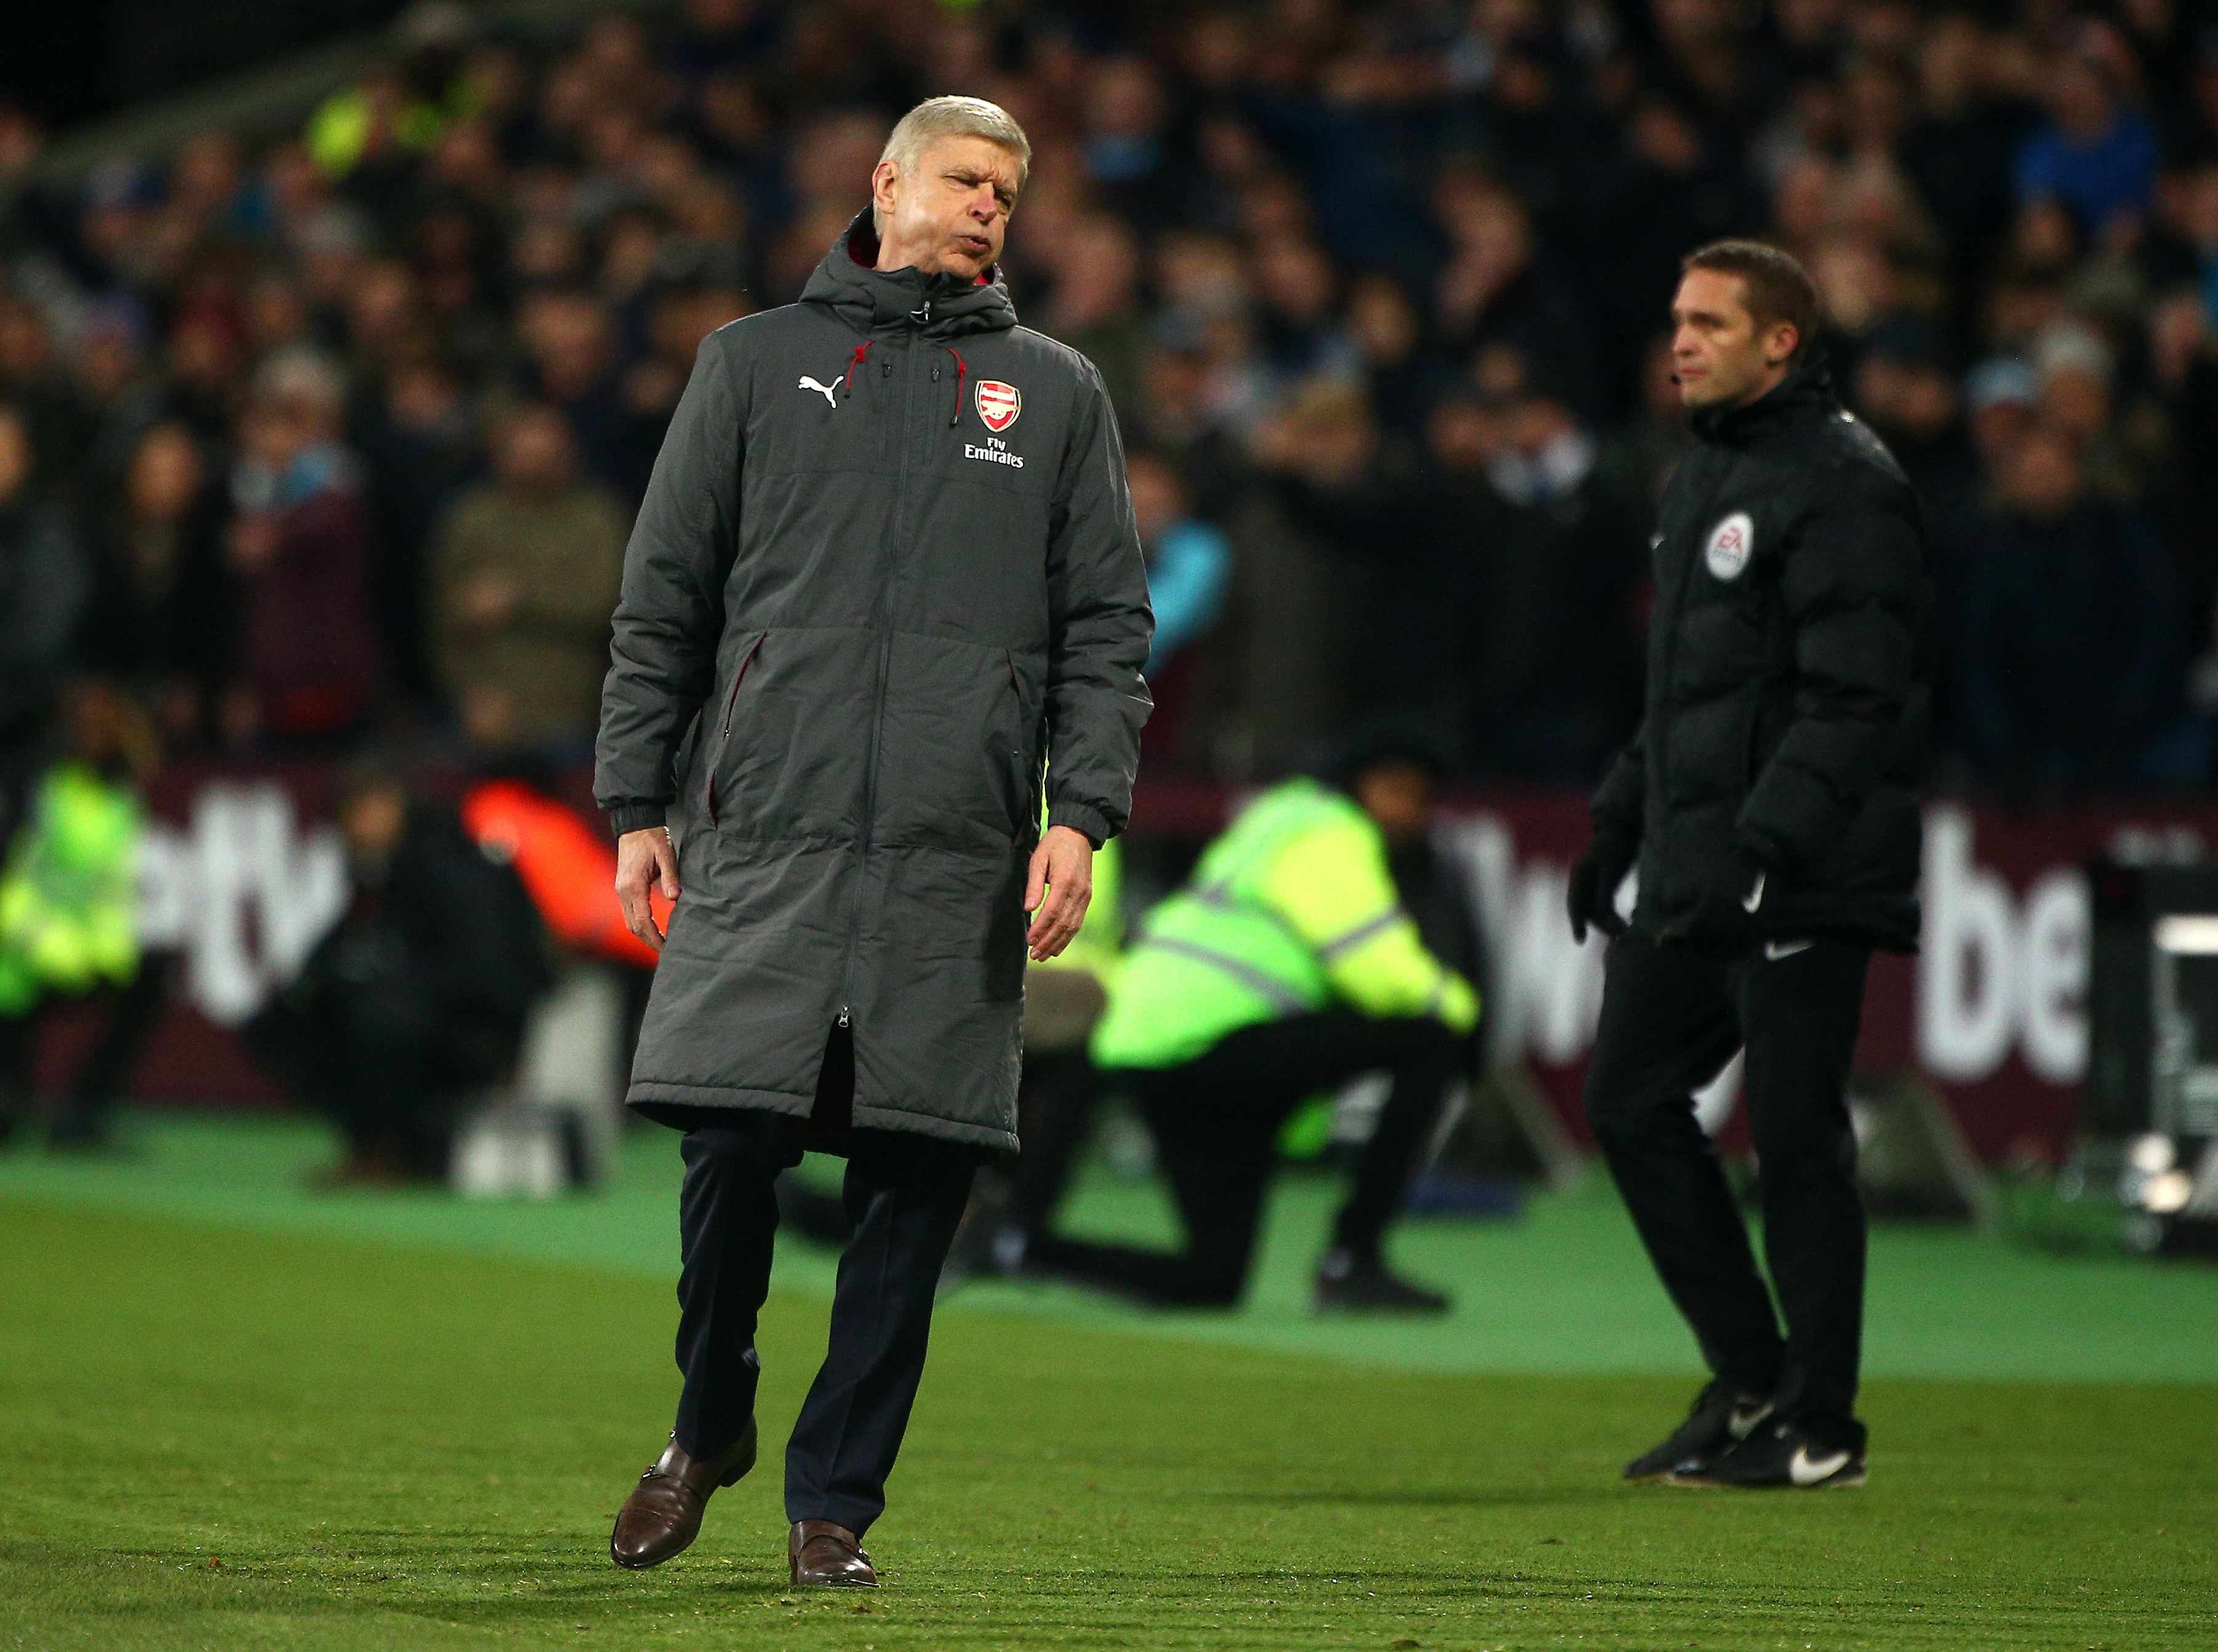 LONDON, ENGLAND - DECEMBER 13:  Arsene Wenger, Manager of Arsenal reacts during the Premier League match between West Ham United and Arsenal at London Stadium on December 13, 2017 in London, England.  (Photo by Charlie Crowhurst/Getty Images)